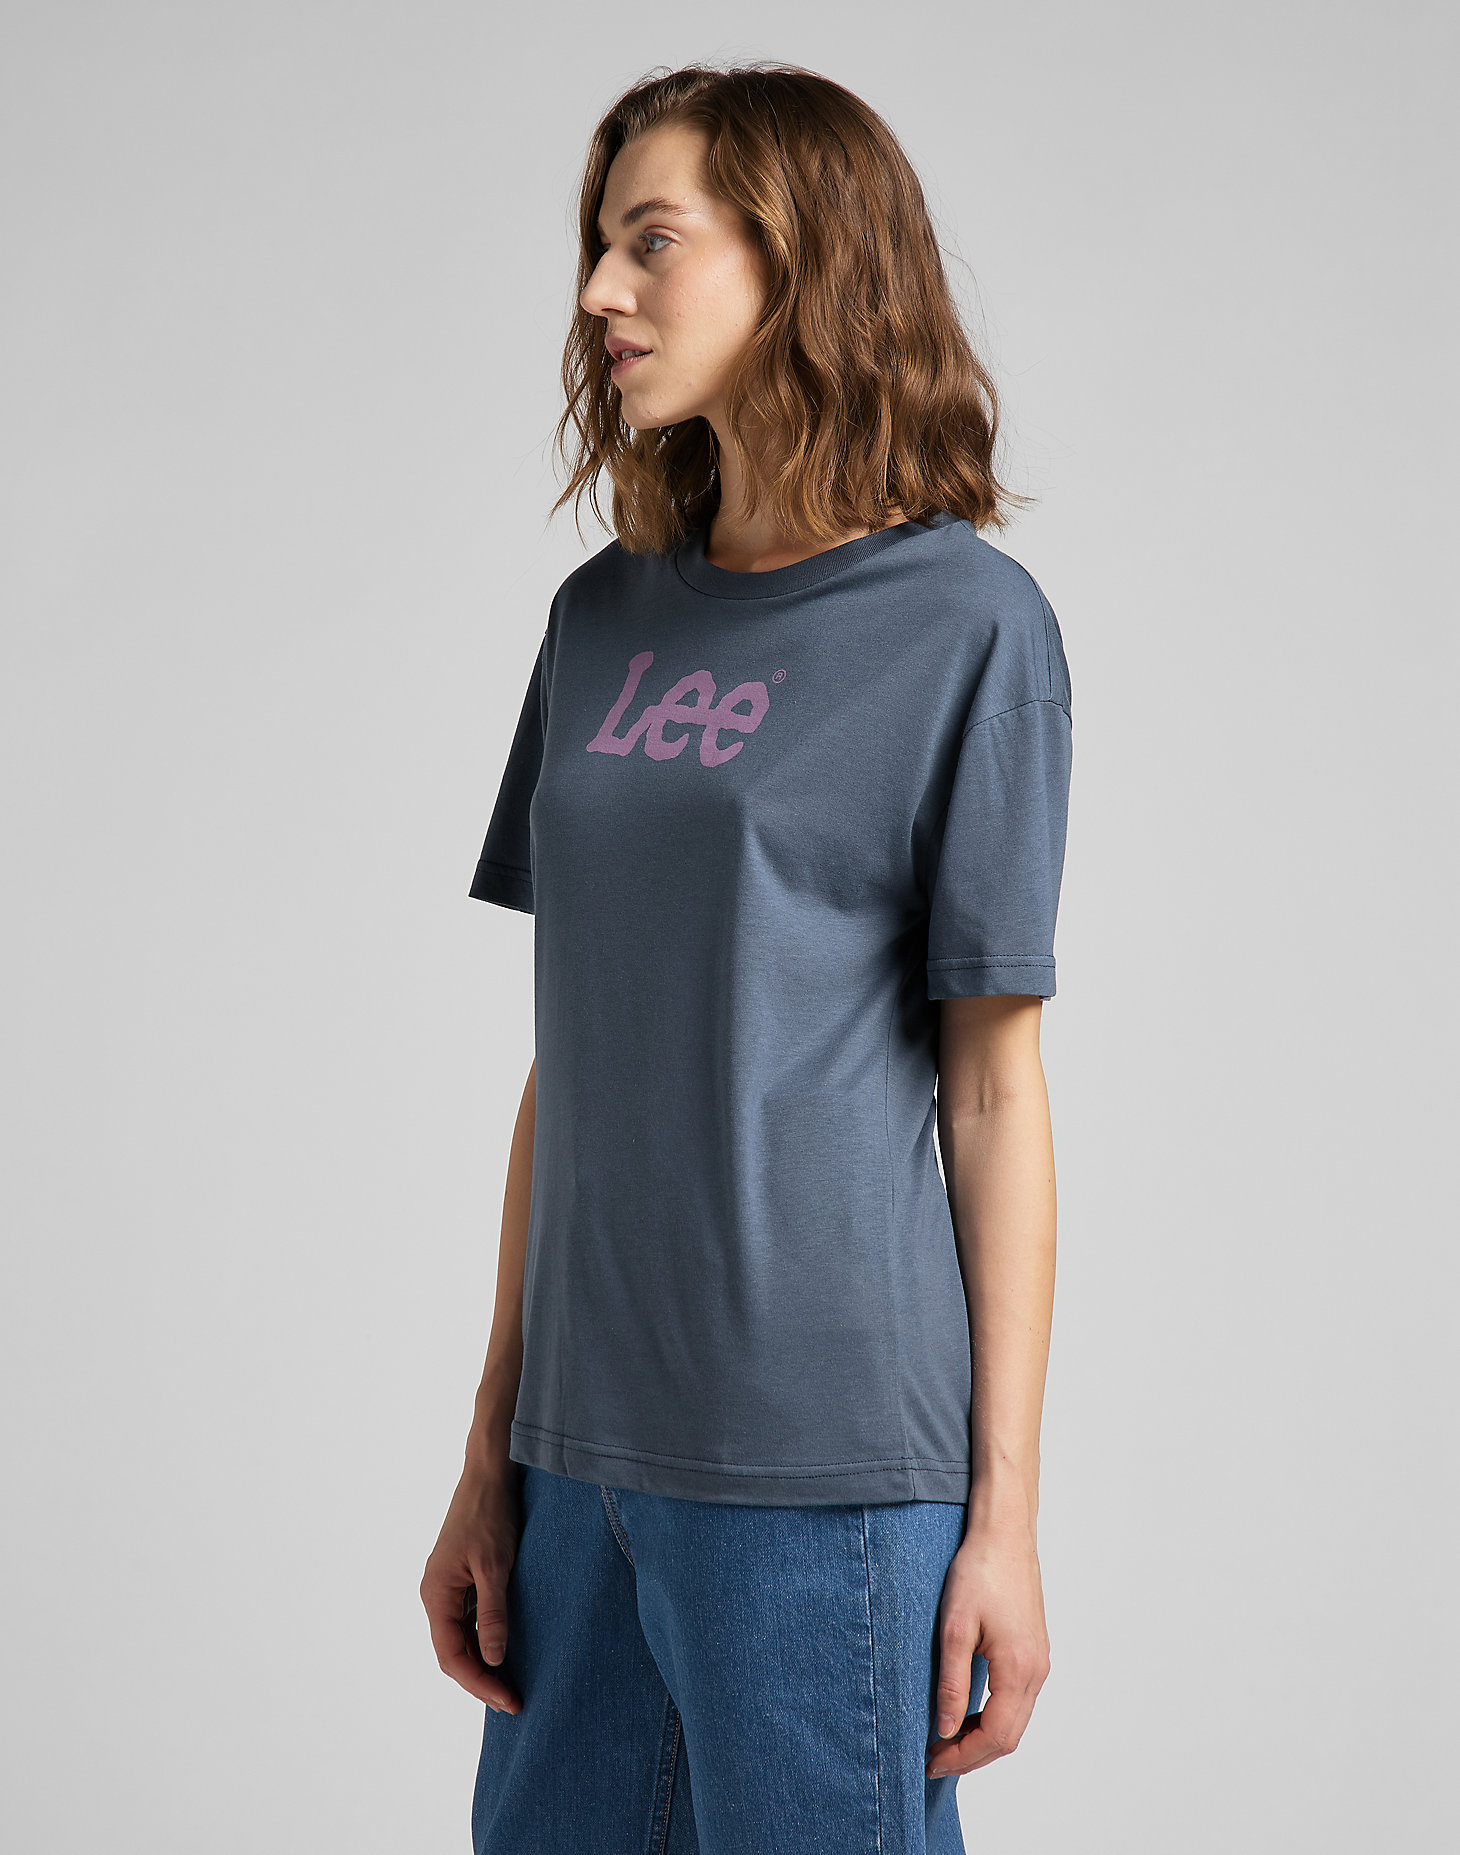 Relaxed Crew Tee in Washed Grey alternative view 3